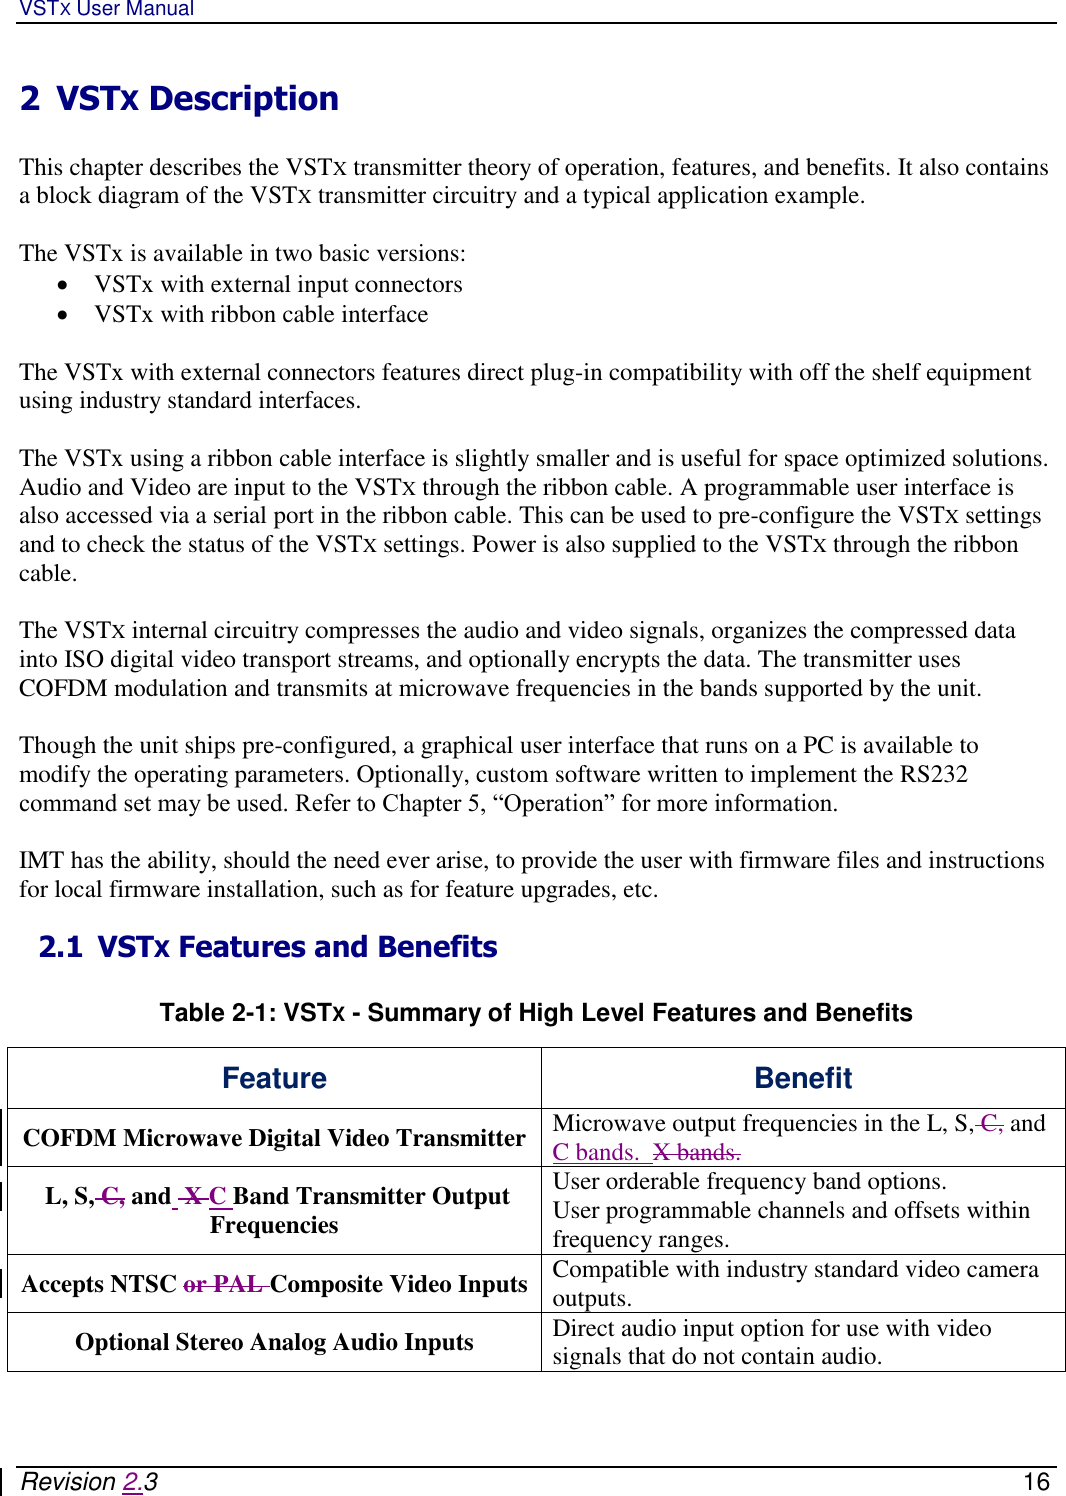 VSTX User Manual   Revision 2.3    16 2 VSTX Description  This chapter describes the VSTX transmitter theory of operation, features, and benefits. It also contains a block diagram of the VSTX transmitter circuitry and a typical application example.   The VSTx is available in two basic versions:   VSTx with external input connectors  VSTx with ribbon cable interface   The VSTx with external connectors features direct plug-in compatibility with off the shelf equipment using industry standard interfaces.  The VSTx using a ribbon cable interface is slightly smaller and is useful for space optimized solutions. Audio and Video are input to the VSTX through the ribbon cable. A programmable user interface is also accessed via a serial port in the ribbon cable. This can be used to pre-configure the VSTX settings and to check the status of the VSTX settings. Power is also supplied to the VSTX through the ribbon cable.   The VSTX internal circuitry compresses the audio and video signals, organizes the compressed data into ISO digital video transport streams, and optionally encrypts the data. The transmitter uses COFDM modulation and transmits at microwave frequencies in the bands supported by the unit.  Though the unit ships pre-configured, a graphical user interface that runs on a PC is available to modify the operating parameters. Optionally, custom software written to implement the RS232 command set may be used. Refer to Chapter 5, “Operation” for more information.  IMT has the ability, should the need ever arise, to provide the user with firmware files and instructions for local firmware installation, such as for feature upgrades, etc. 2.1 VSTX Features and Benefits  Table 2-1: VSTX - Summary of High Level Features and Benefits  Feature Benefit COFDM Microwave Digital Video Transmitter Microwave output frequencies in the L, S, C, and C bands.  X bands.    L, S, C, and  X C Band Transmitter Output Frequencies User orderable frequency band options.  User programmable channels and offsets within frequency ranges.  Accepts NTSC or PAL Composite Video Inputs Compatible with industry standard video camera outputs.  Optional Stereo Analog Audio Inputs Direct audio input option for use with video signals that do not contain audio. 